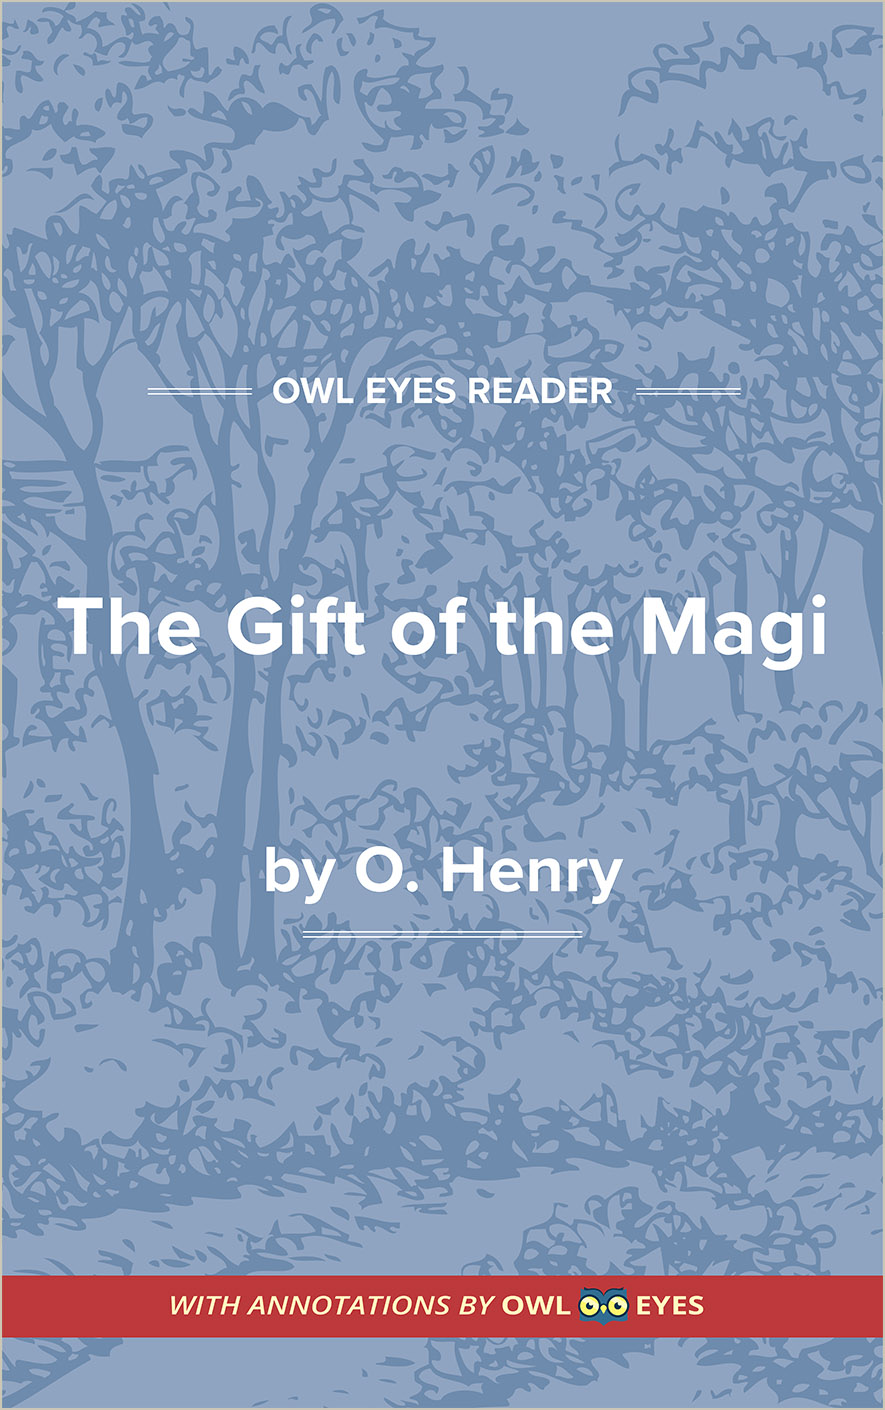 The Gift of the Magi by O Henry  Goodreads